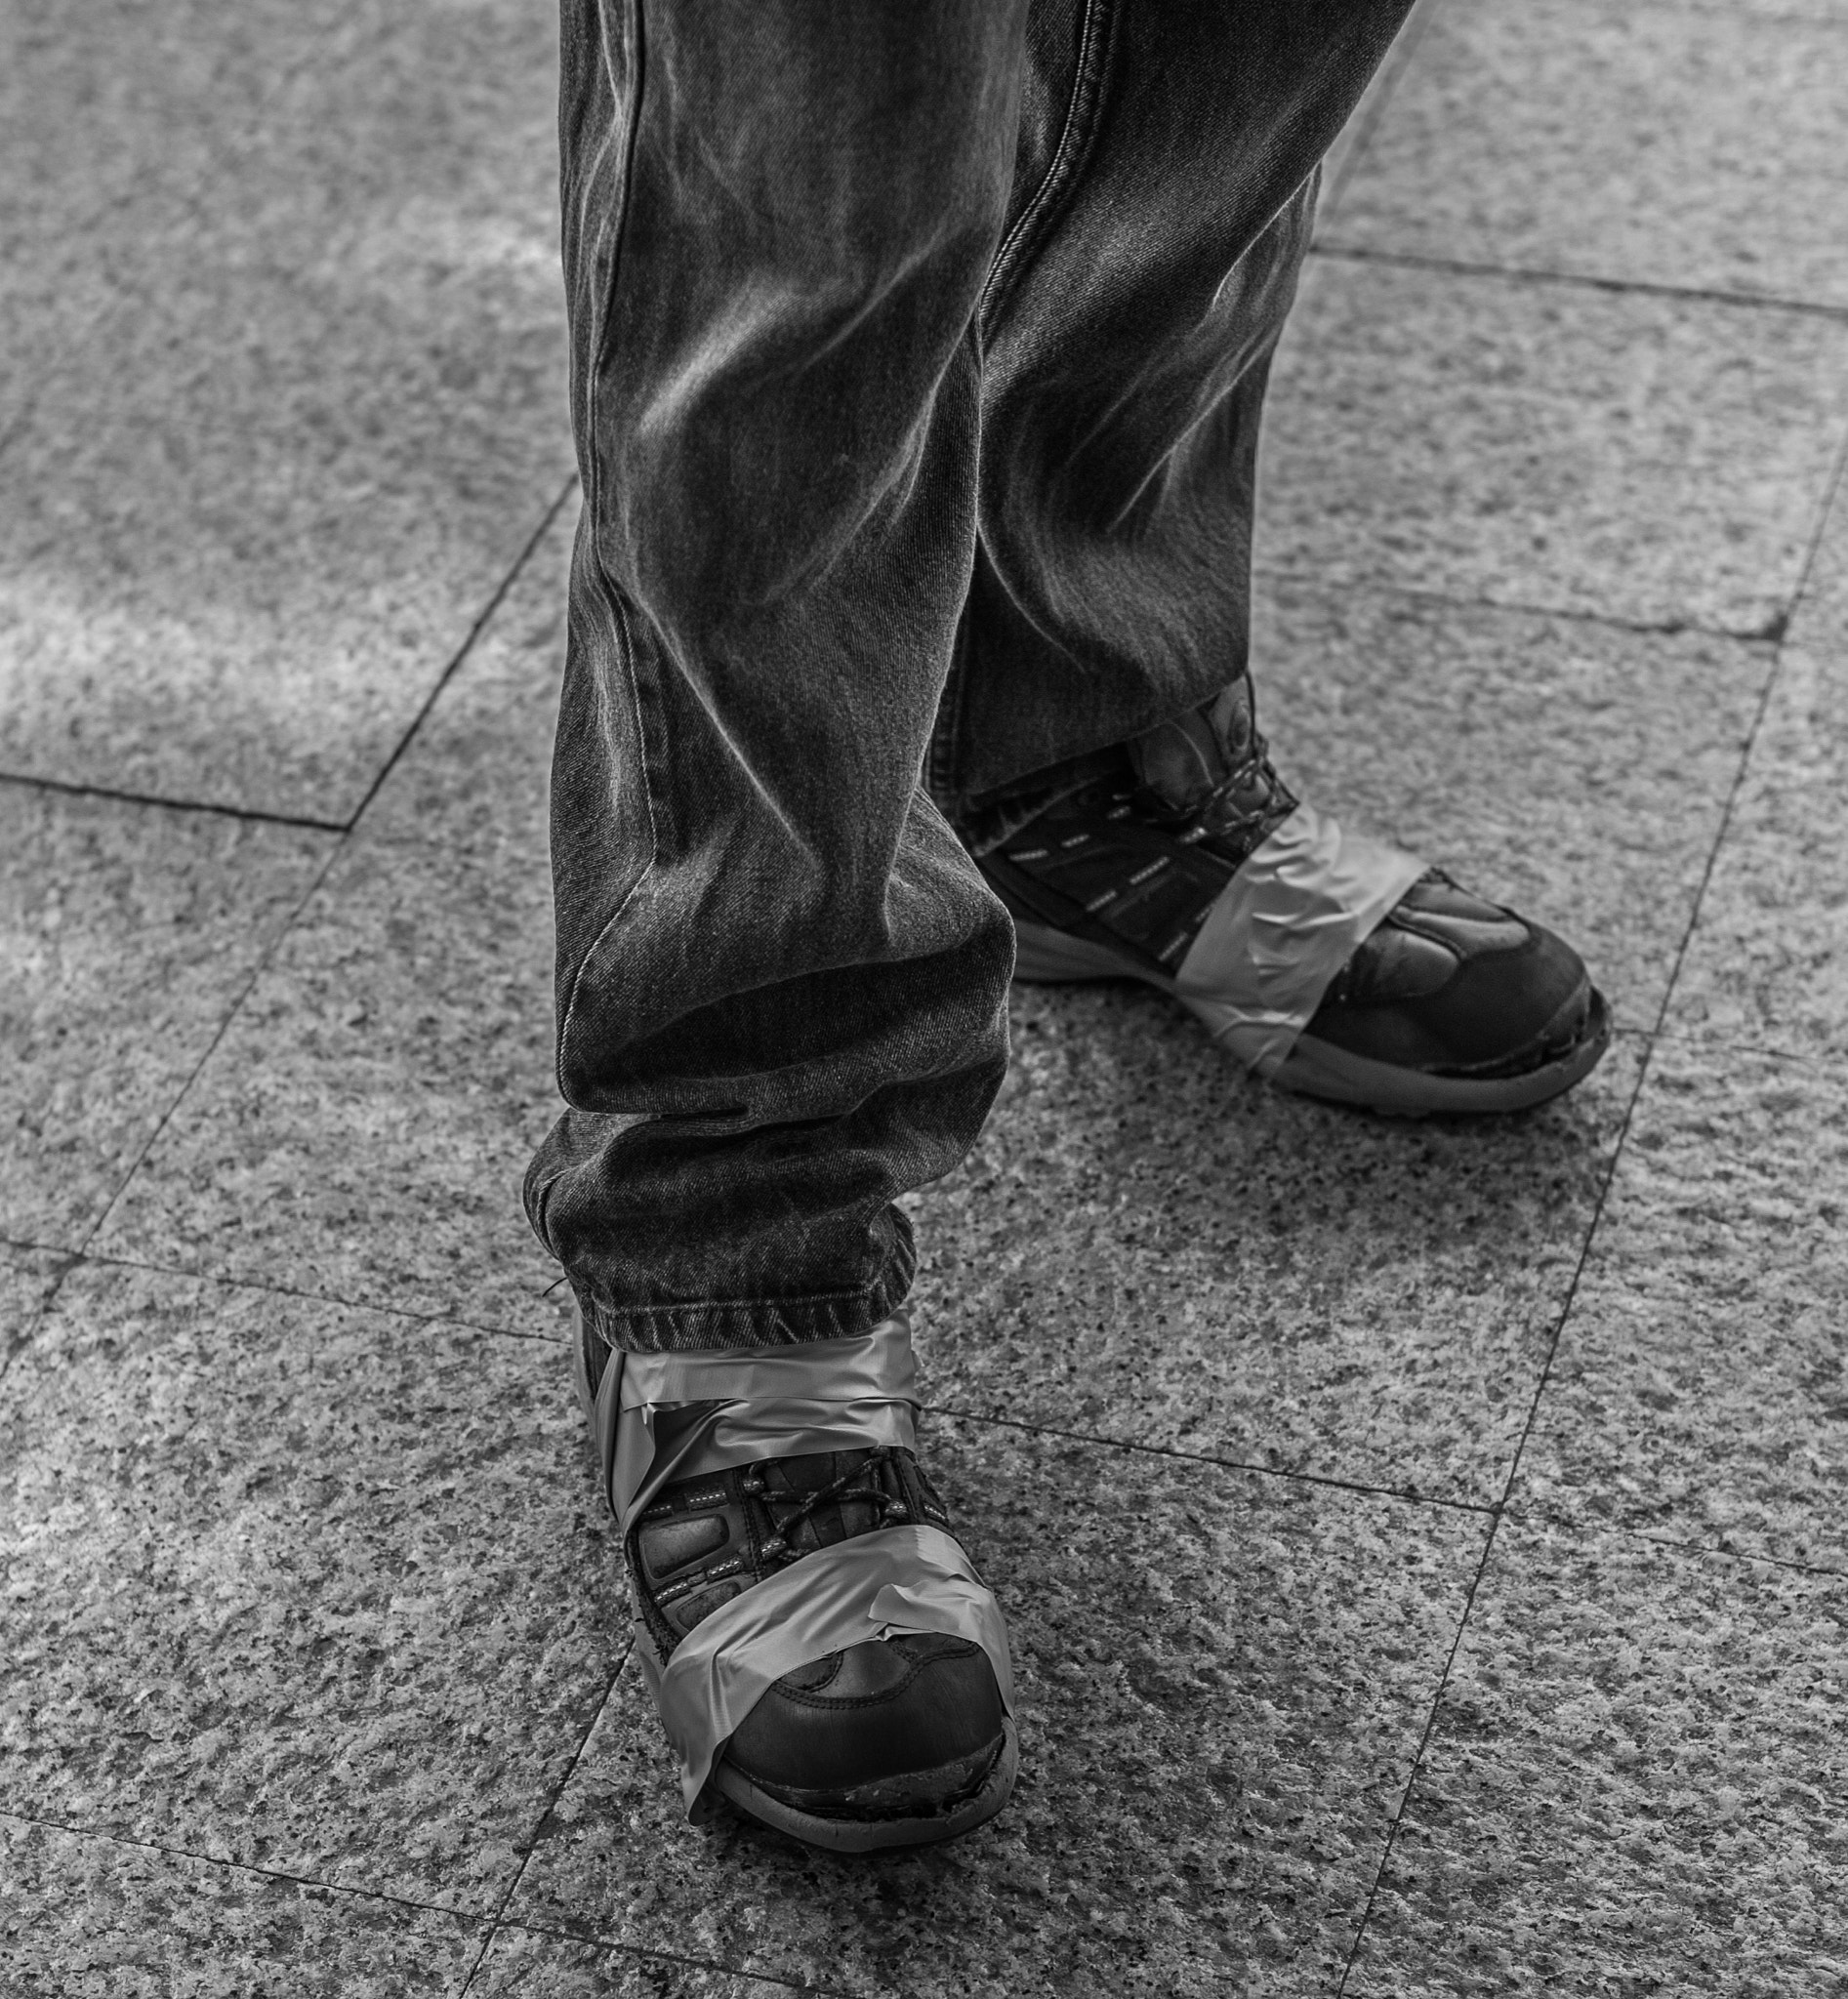 Nikon D700 sample photo. New style shoes b&w photography